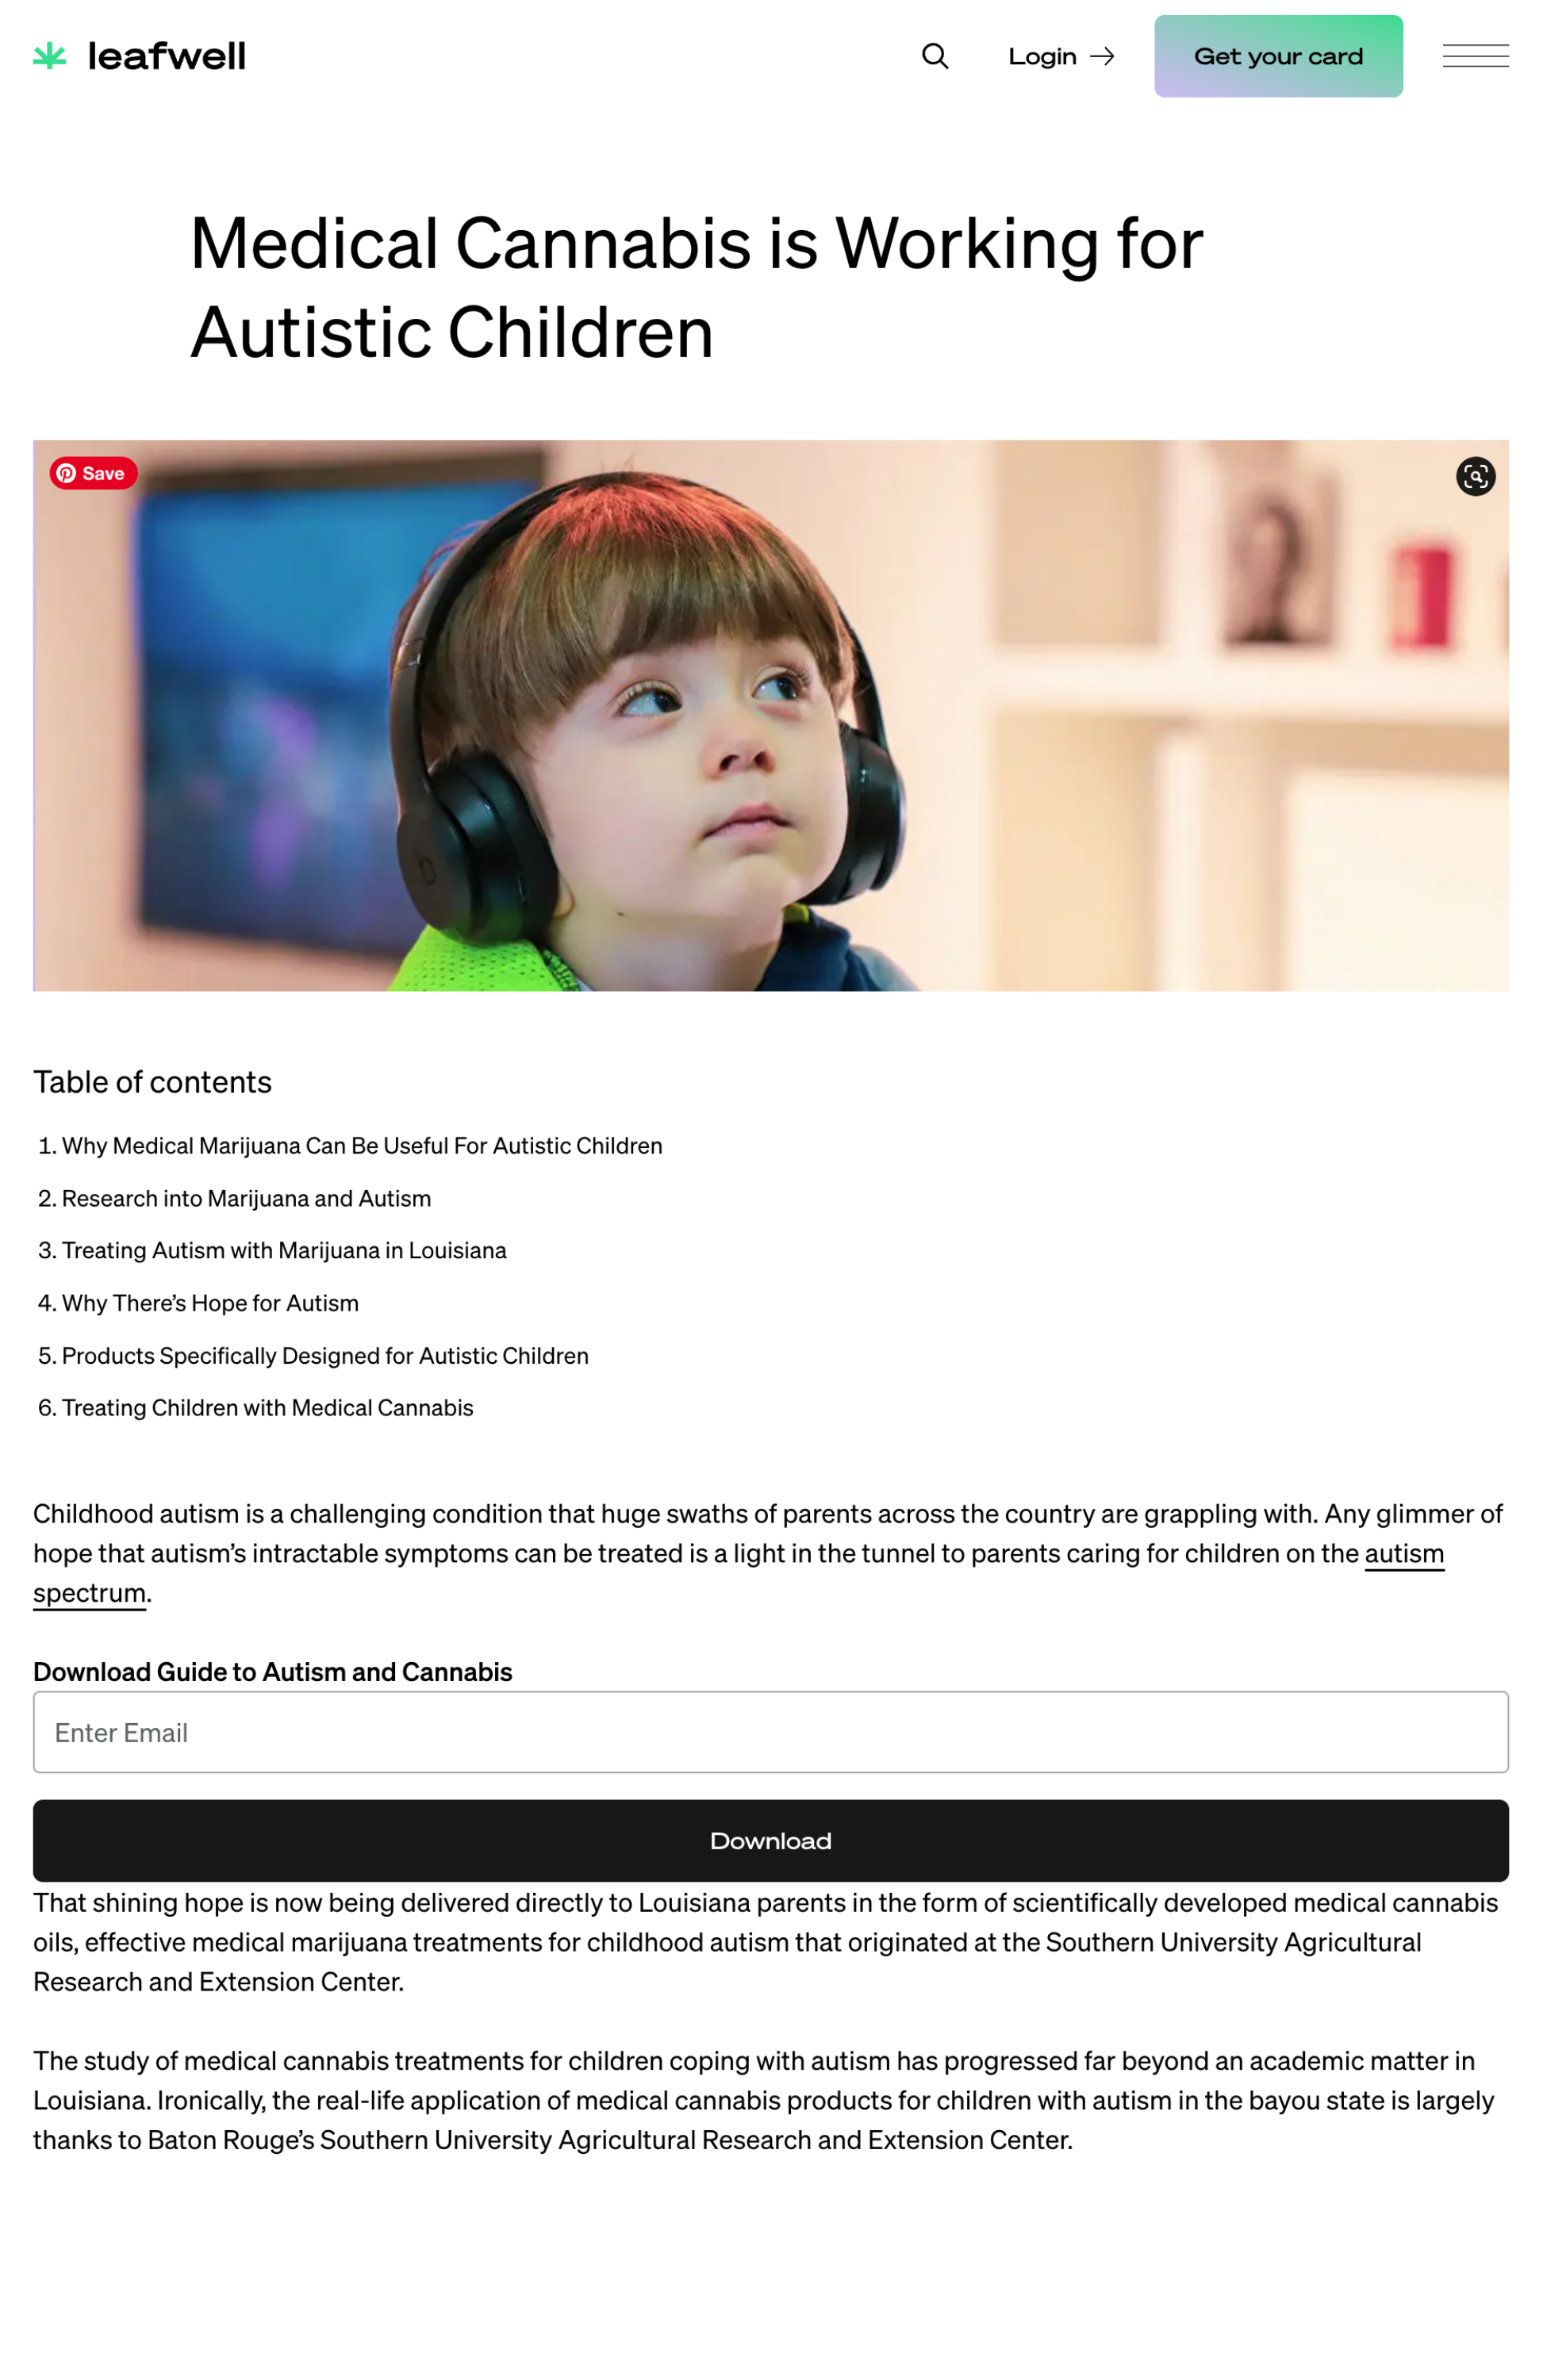 Leafwell - Medical Cannabis is Working for Autistic Children.png